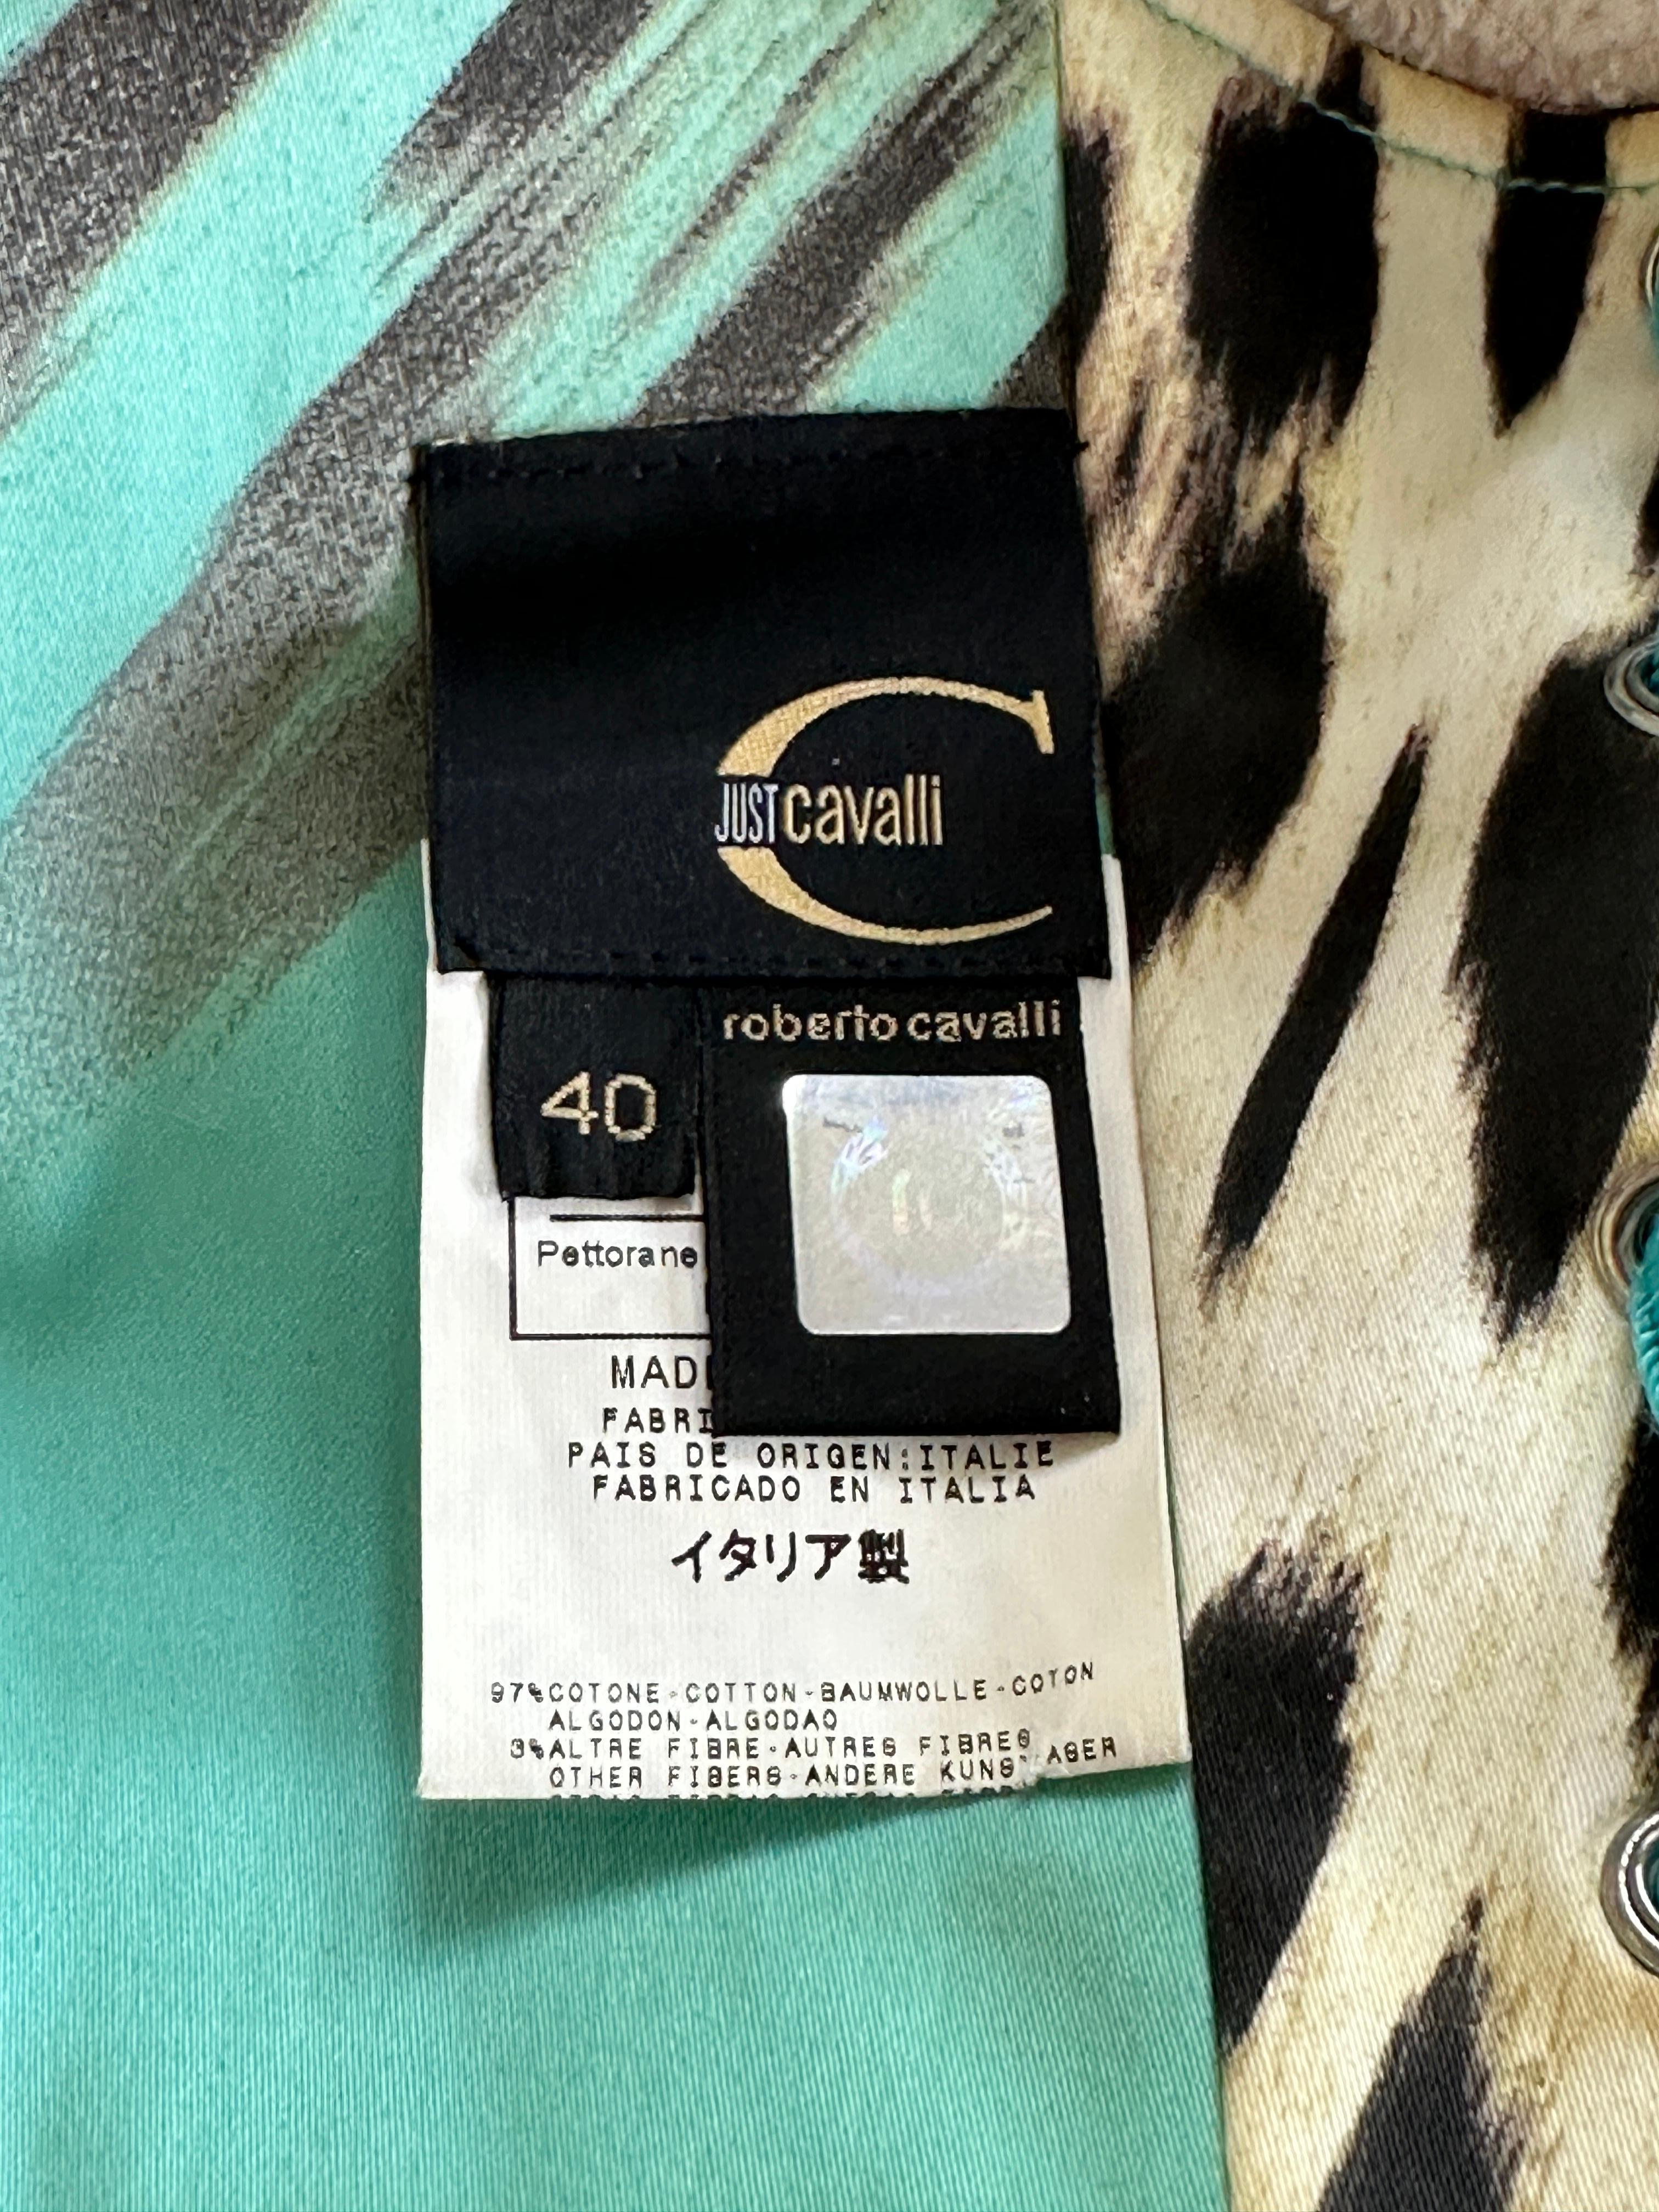 Roberto Cavalli for Just Cavalli Zebra Print Corset with Lace Up Details  For Sale 7